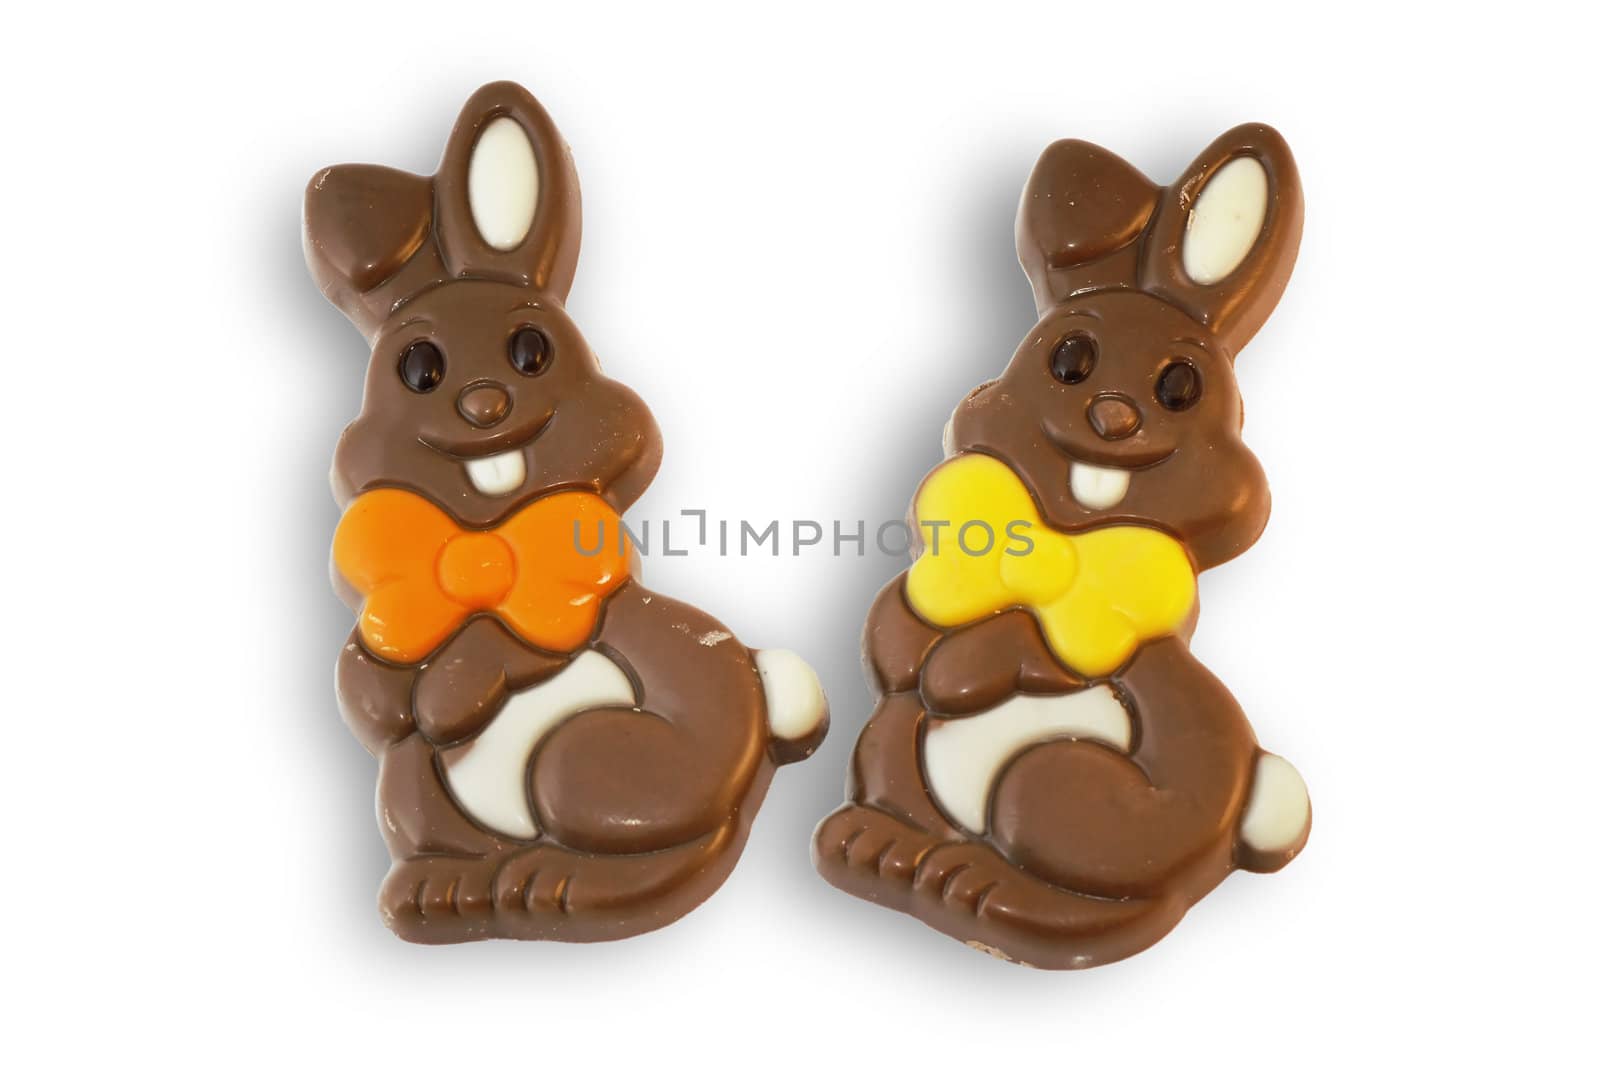 Cute chocolate Easter bunnies by Mirage3